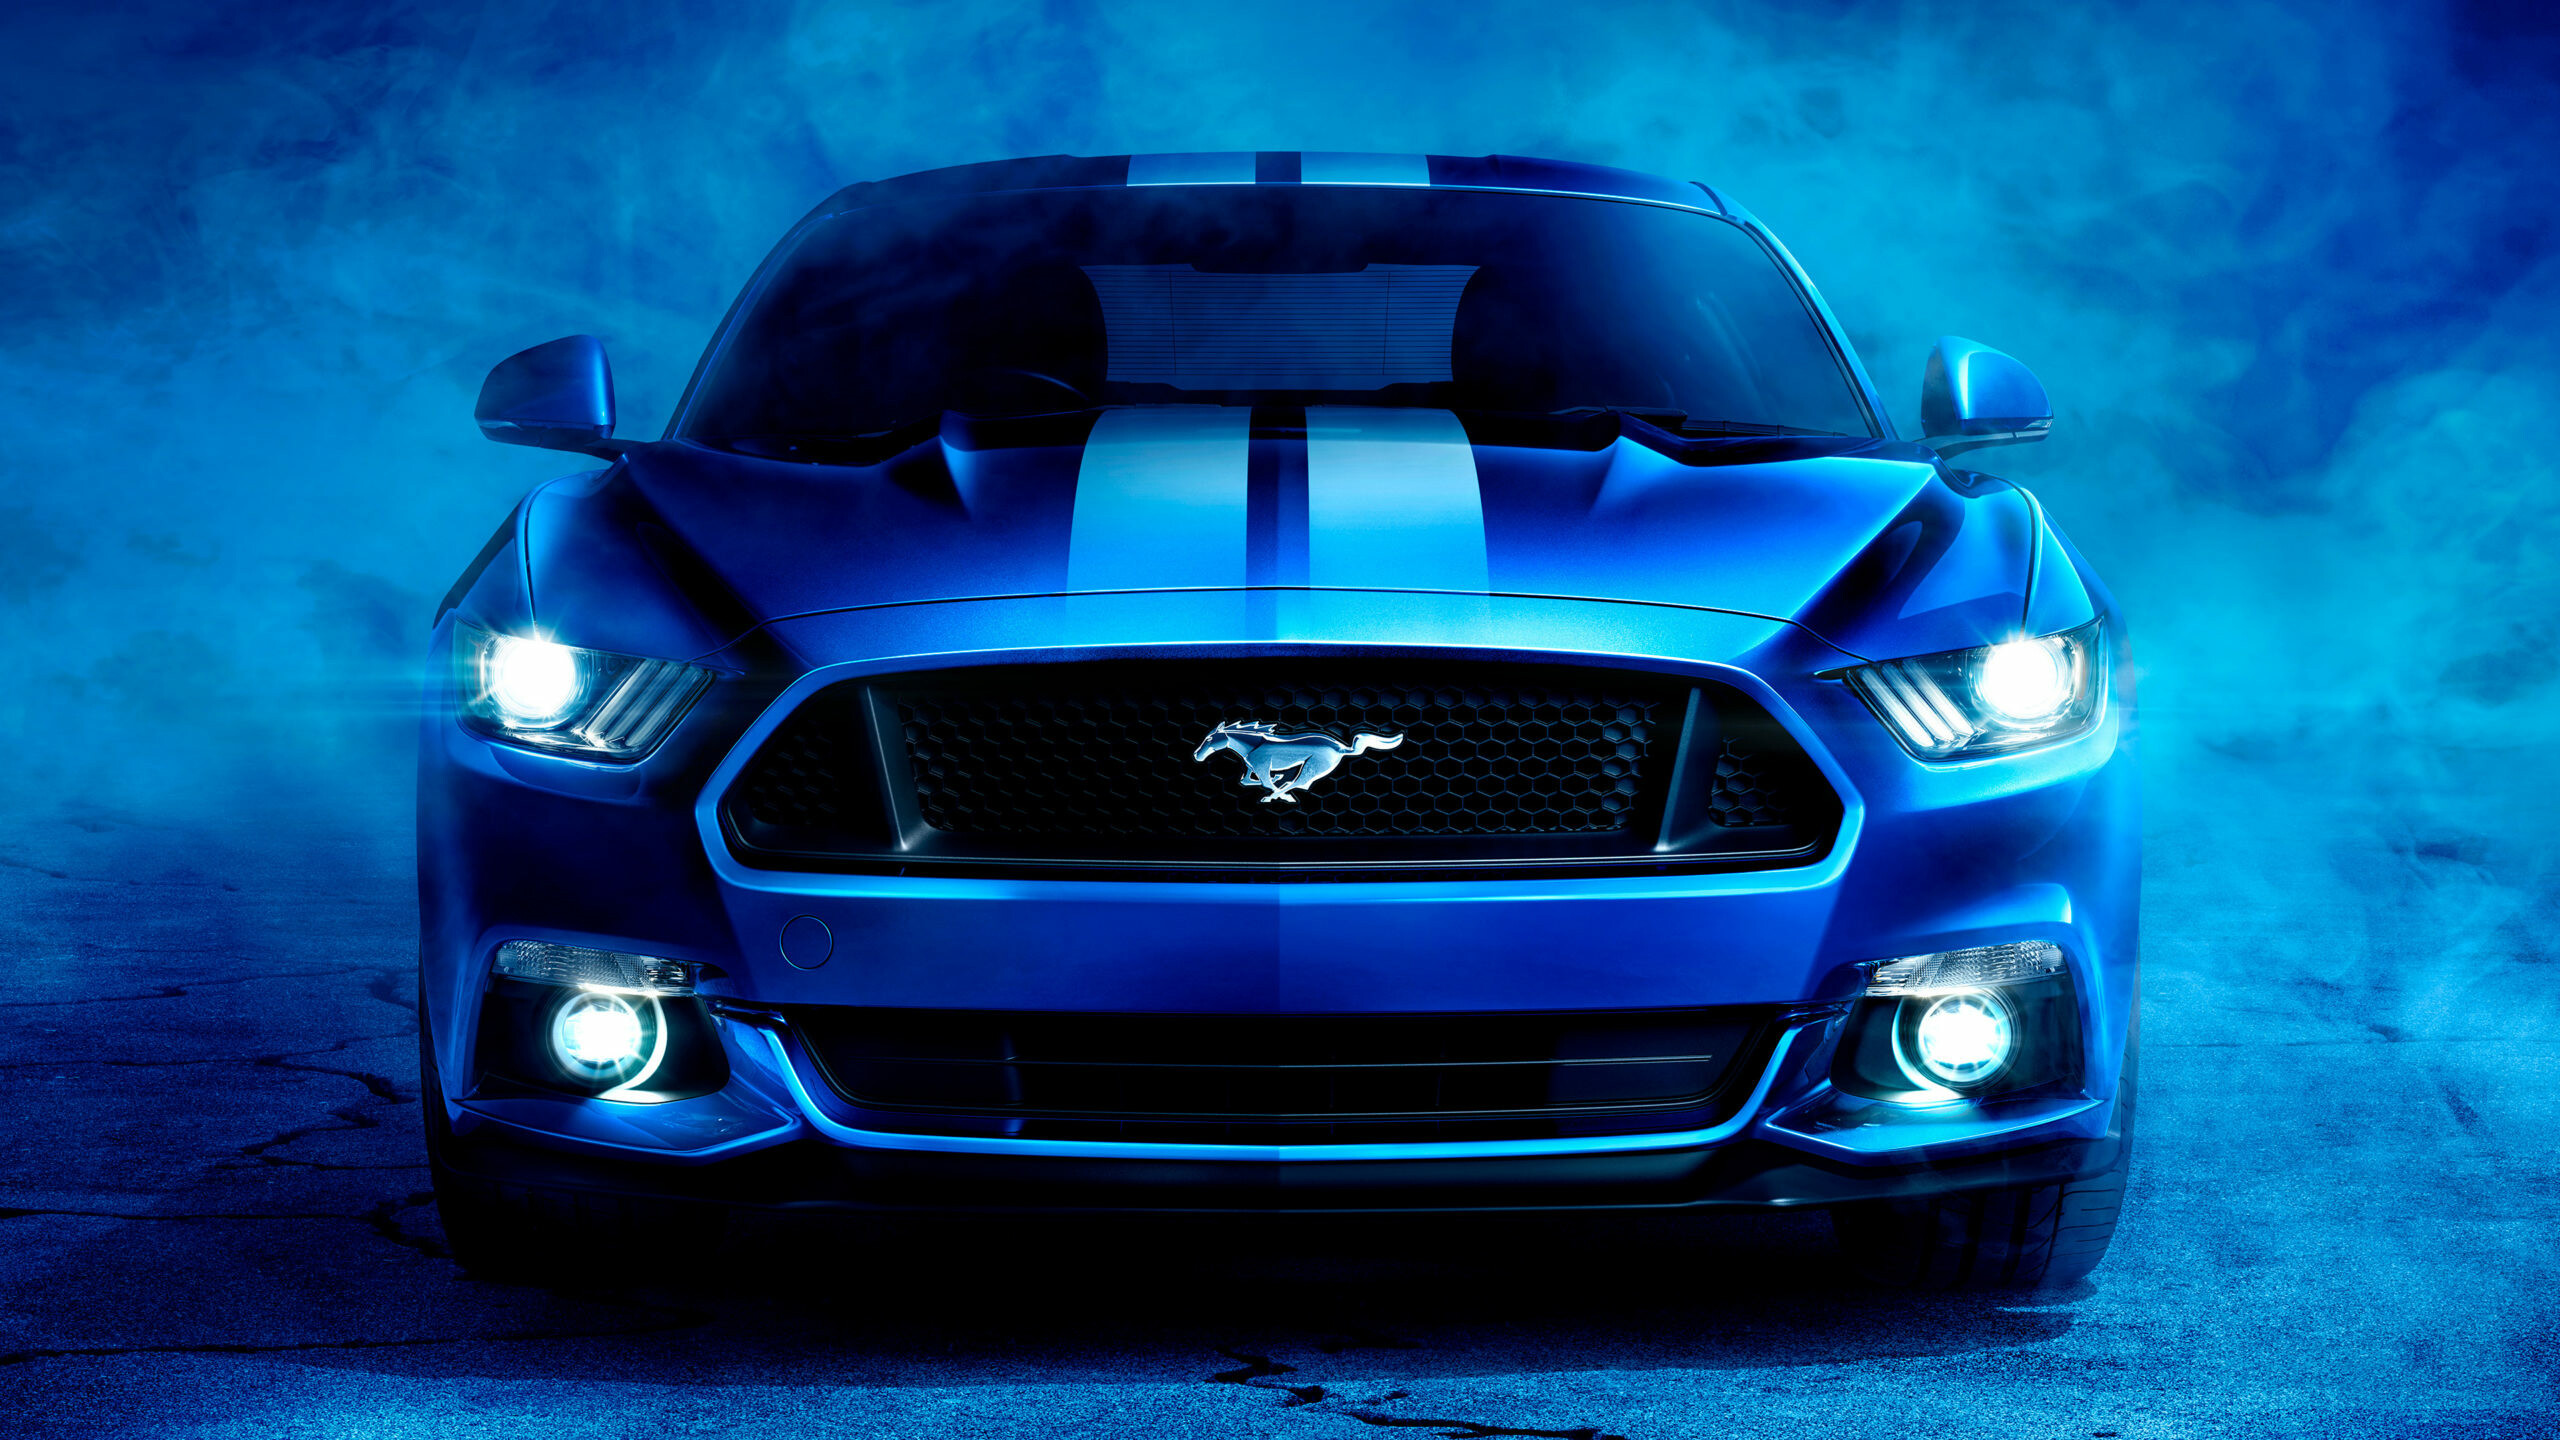 Ford: Shelby Mustang, A high-performance variant, Shelby American. 2560x1440 HD Wallpaper.